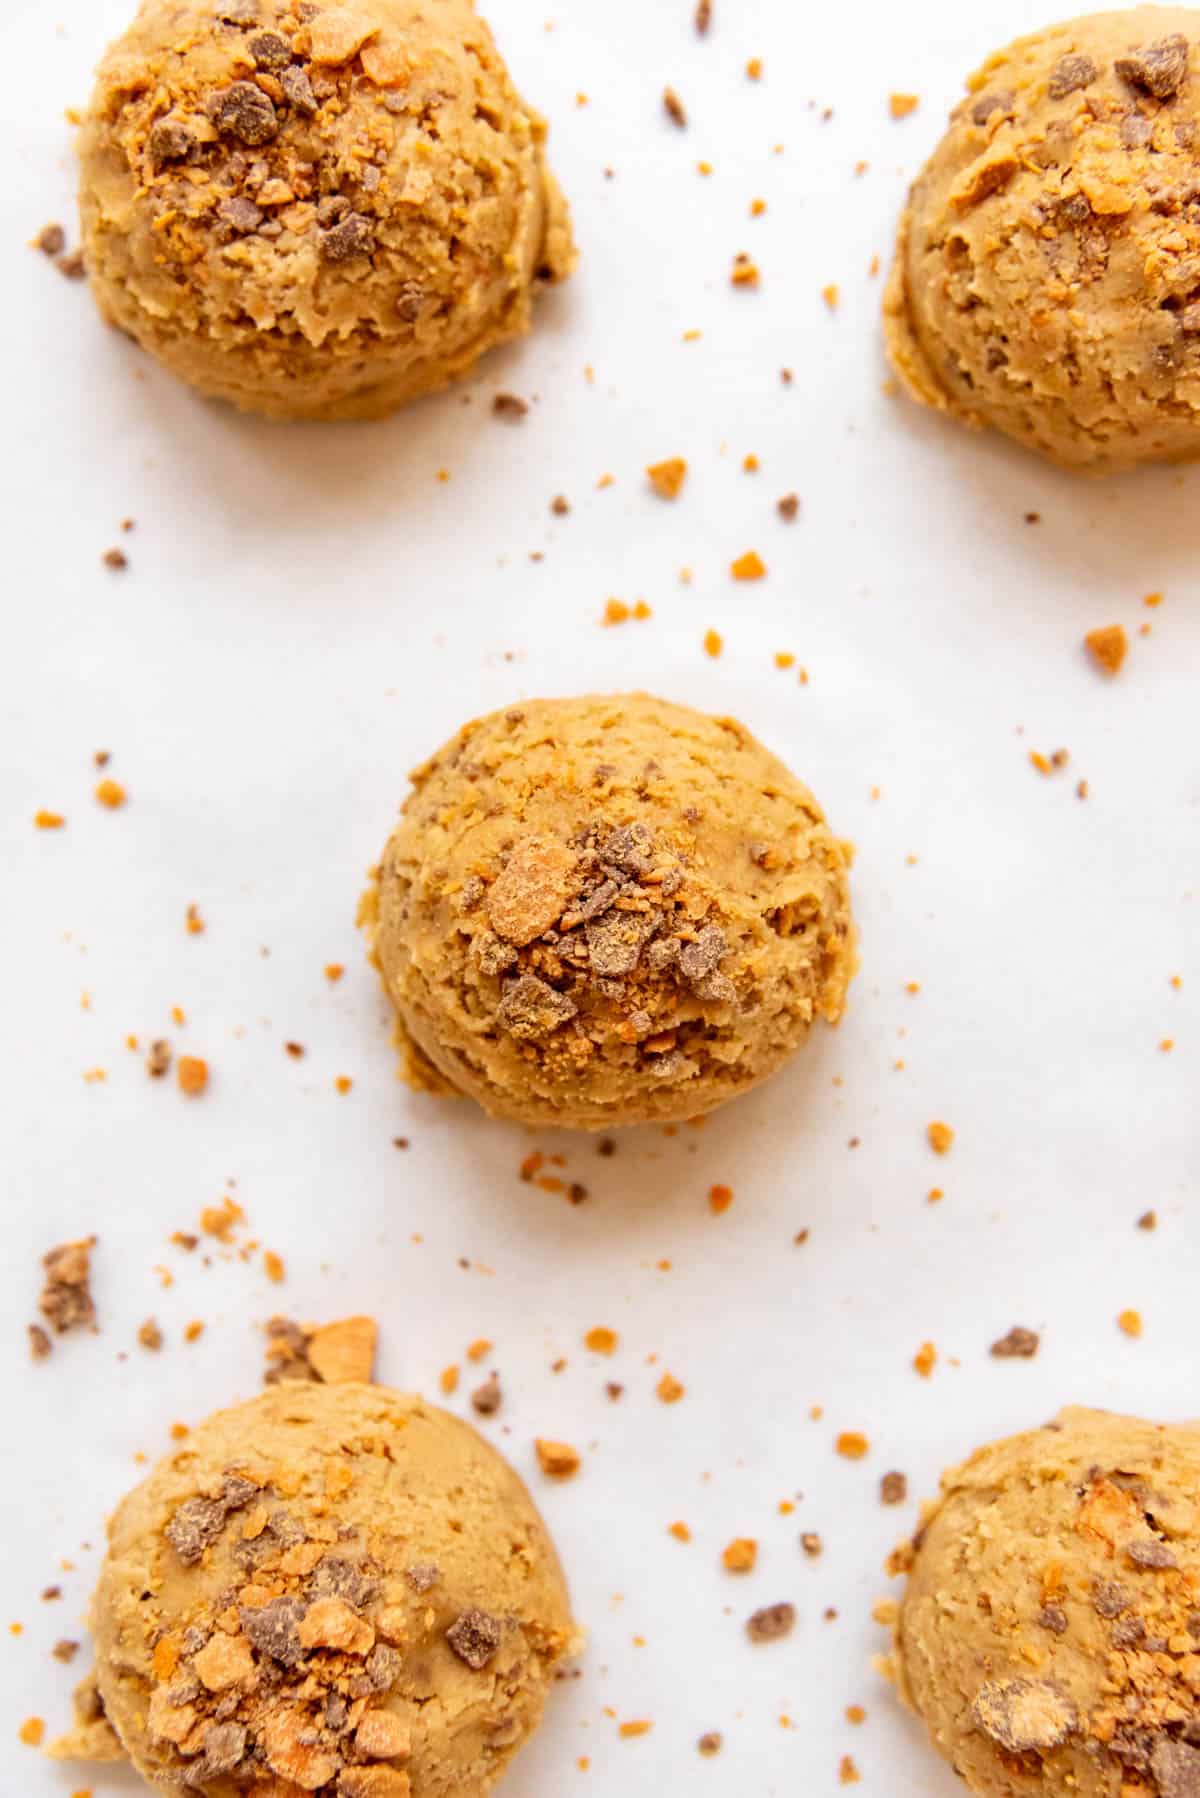 Balls of butterfingers cookie dough with more crushed butterfingers pressed on top.